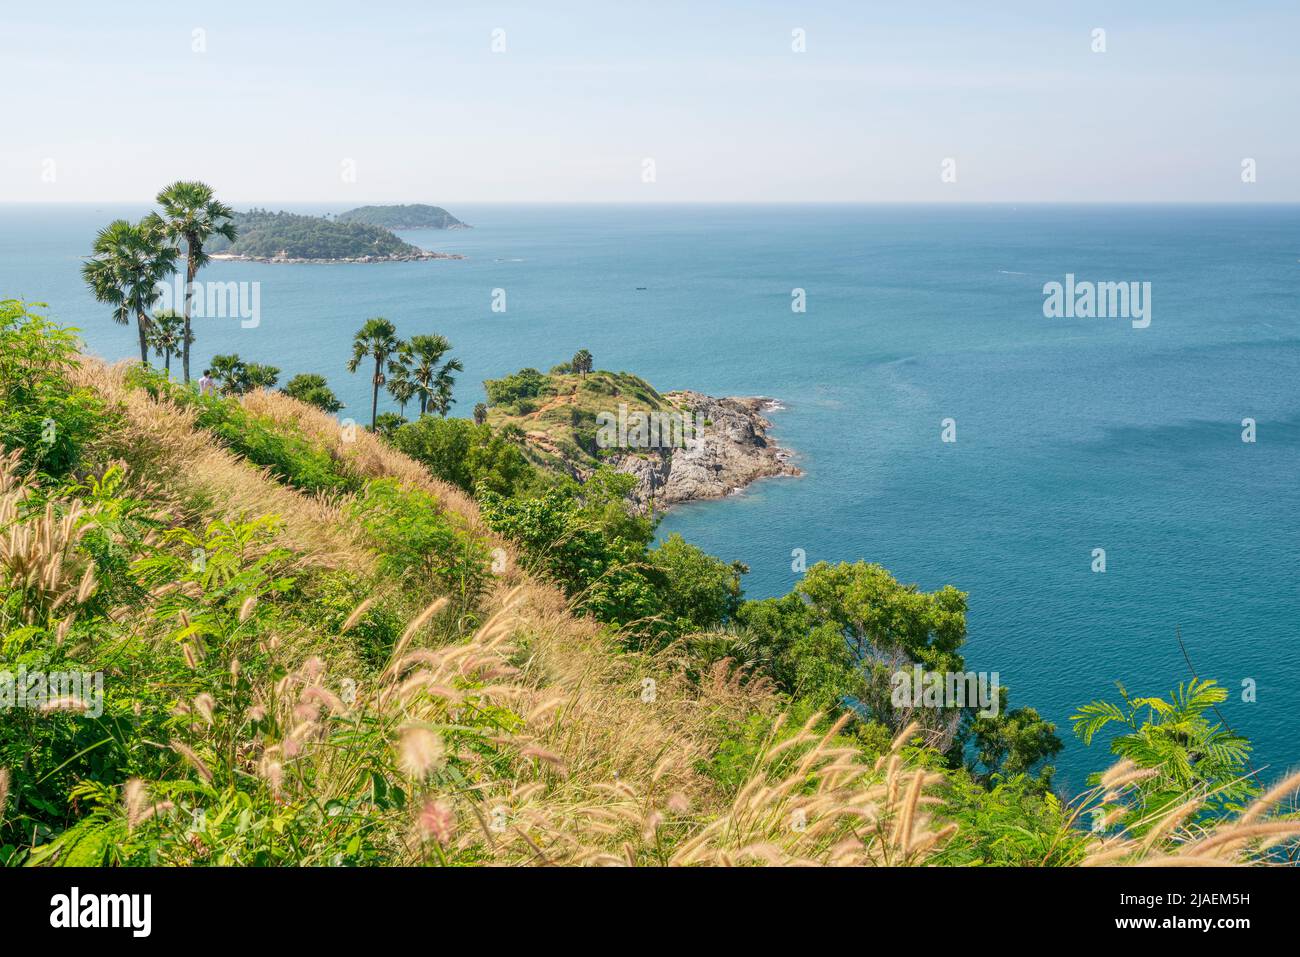 Phuket island Laem promthep cape with coconut palm trees and grass in the foreground beautiful scenery andaman sea in summer season Phuket thailand Be Stock Photo